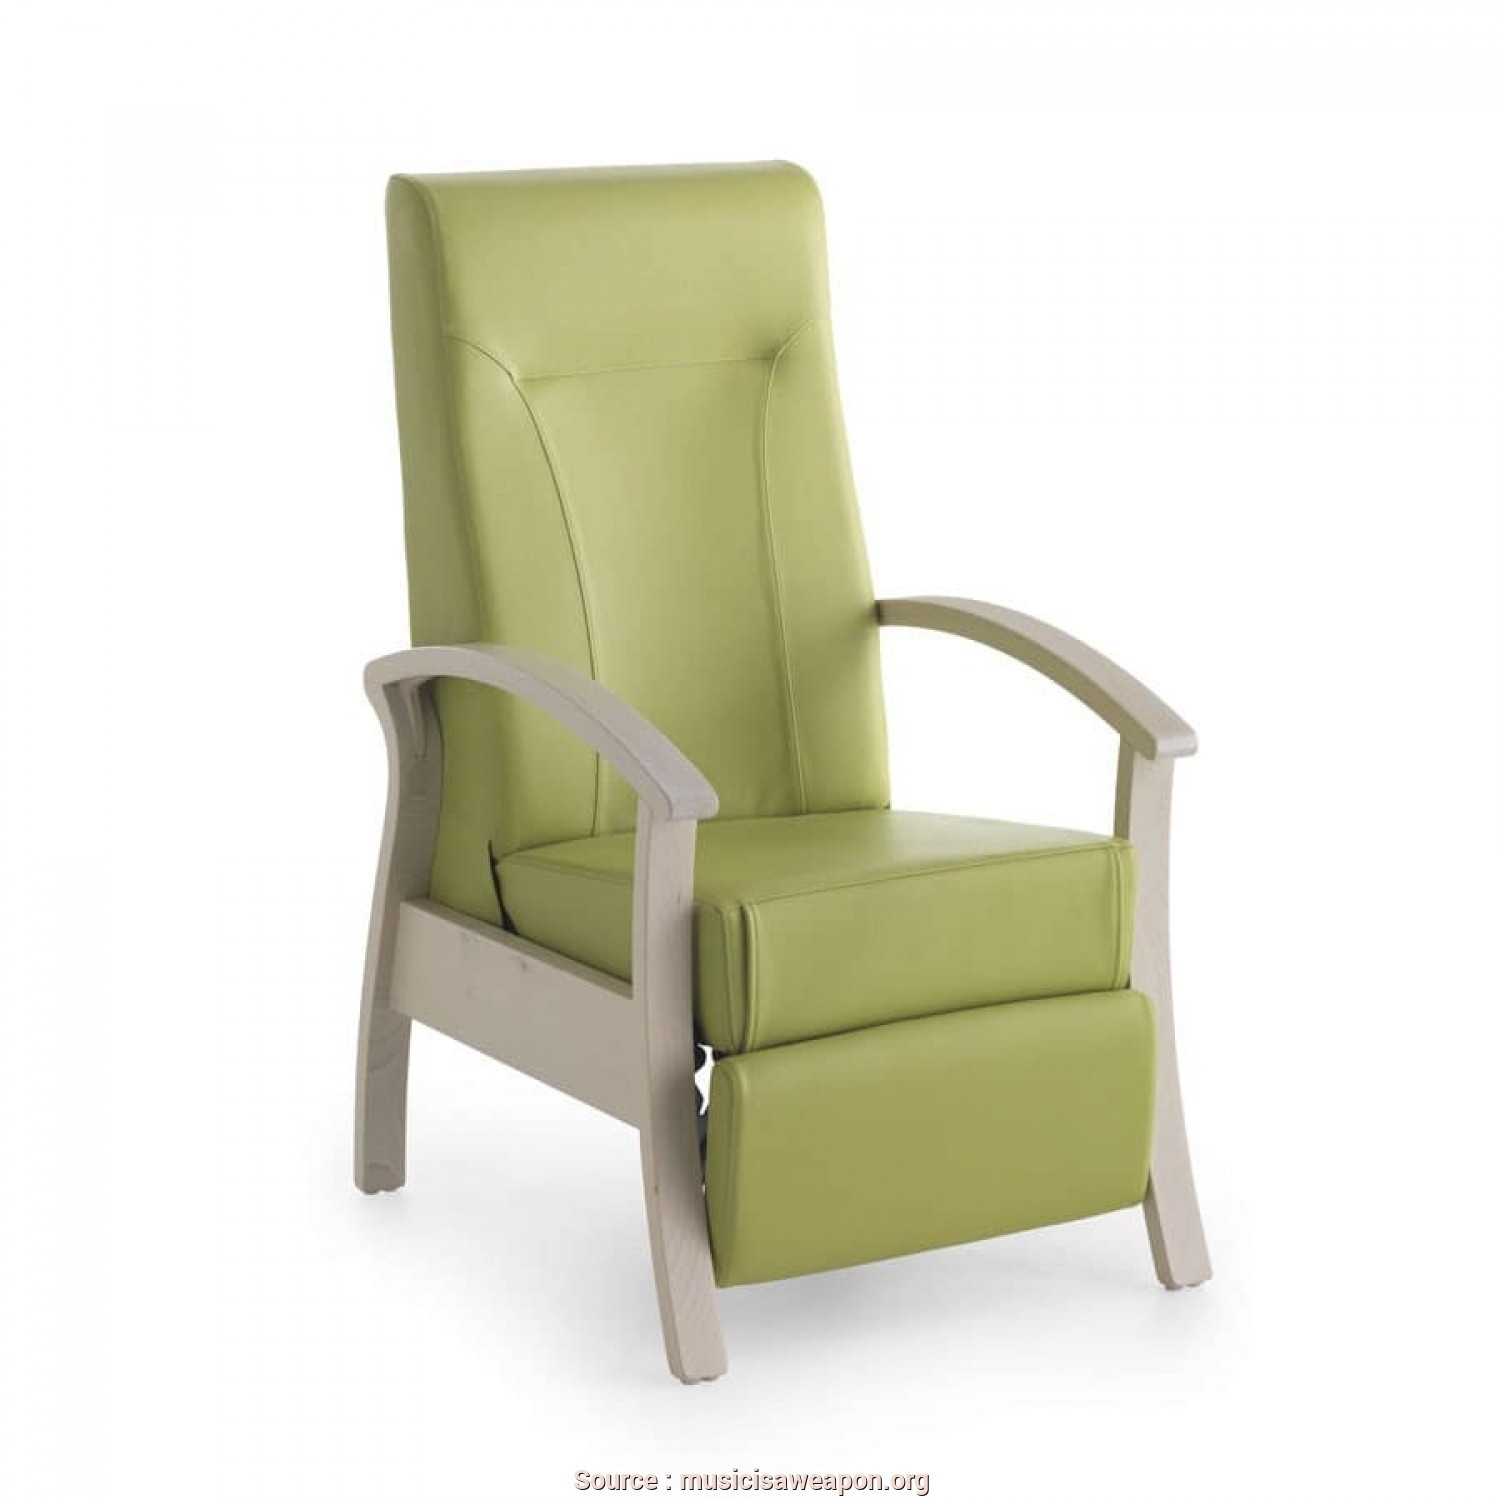 50 Armchairs For Elderly Guide How To Choose The Best Ideas On Foter